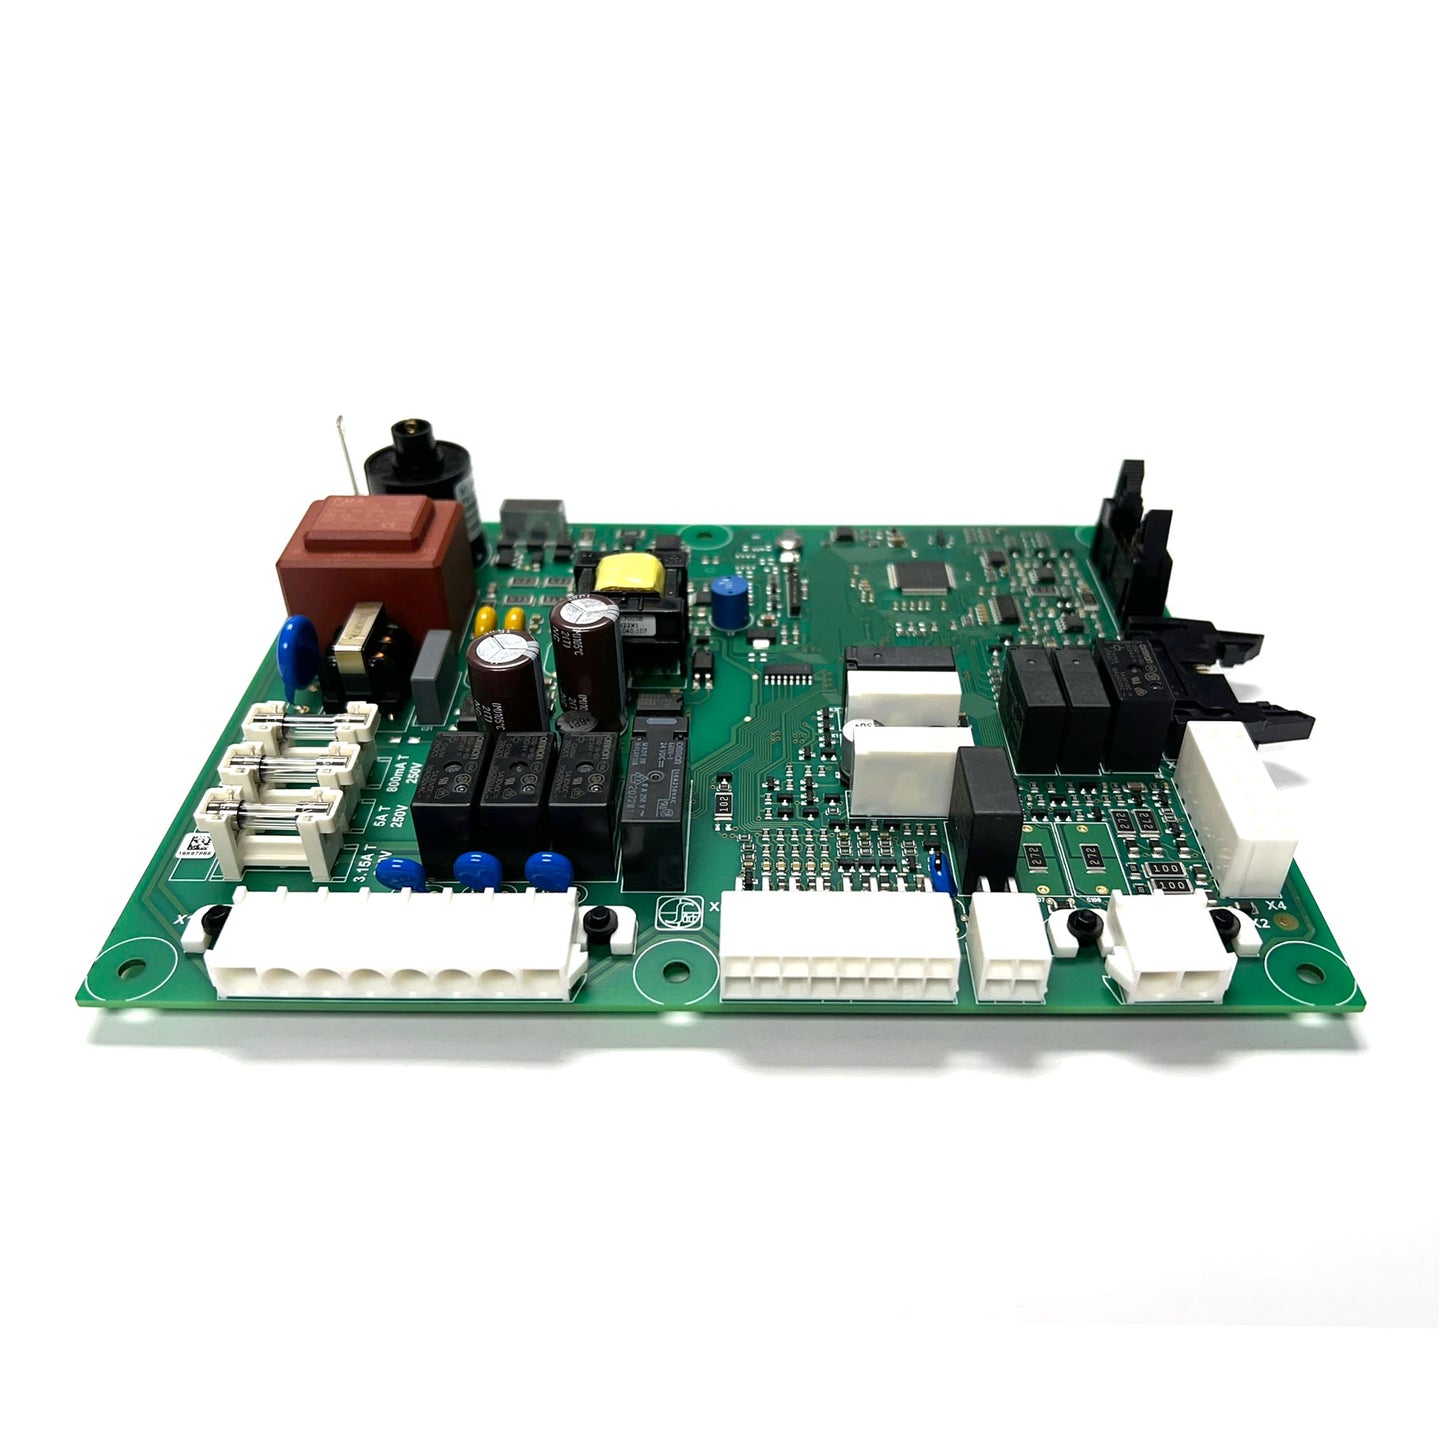 100167840 - High Altitude Integrated Control Board for Knight Boilers